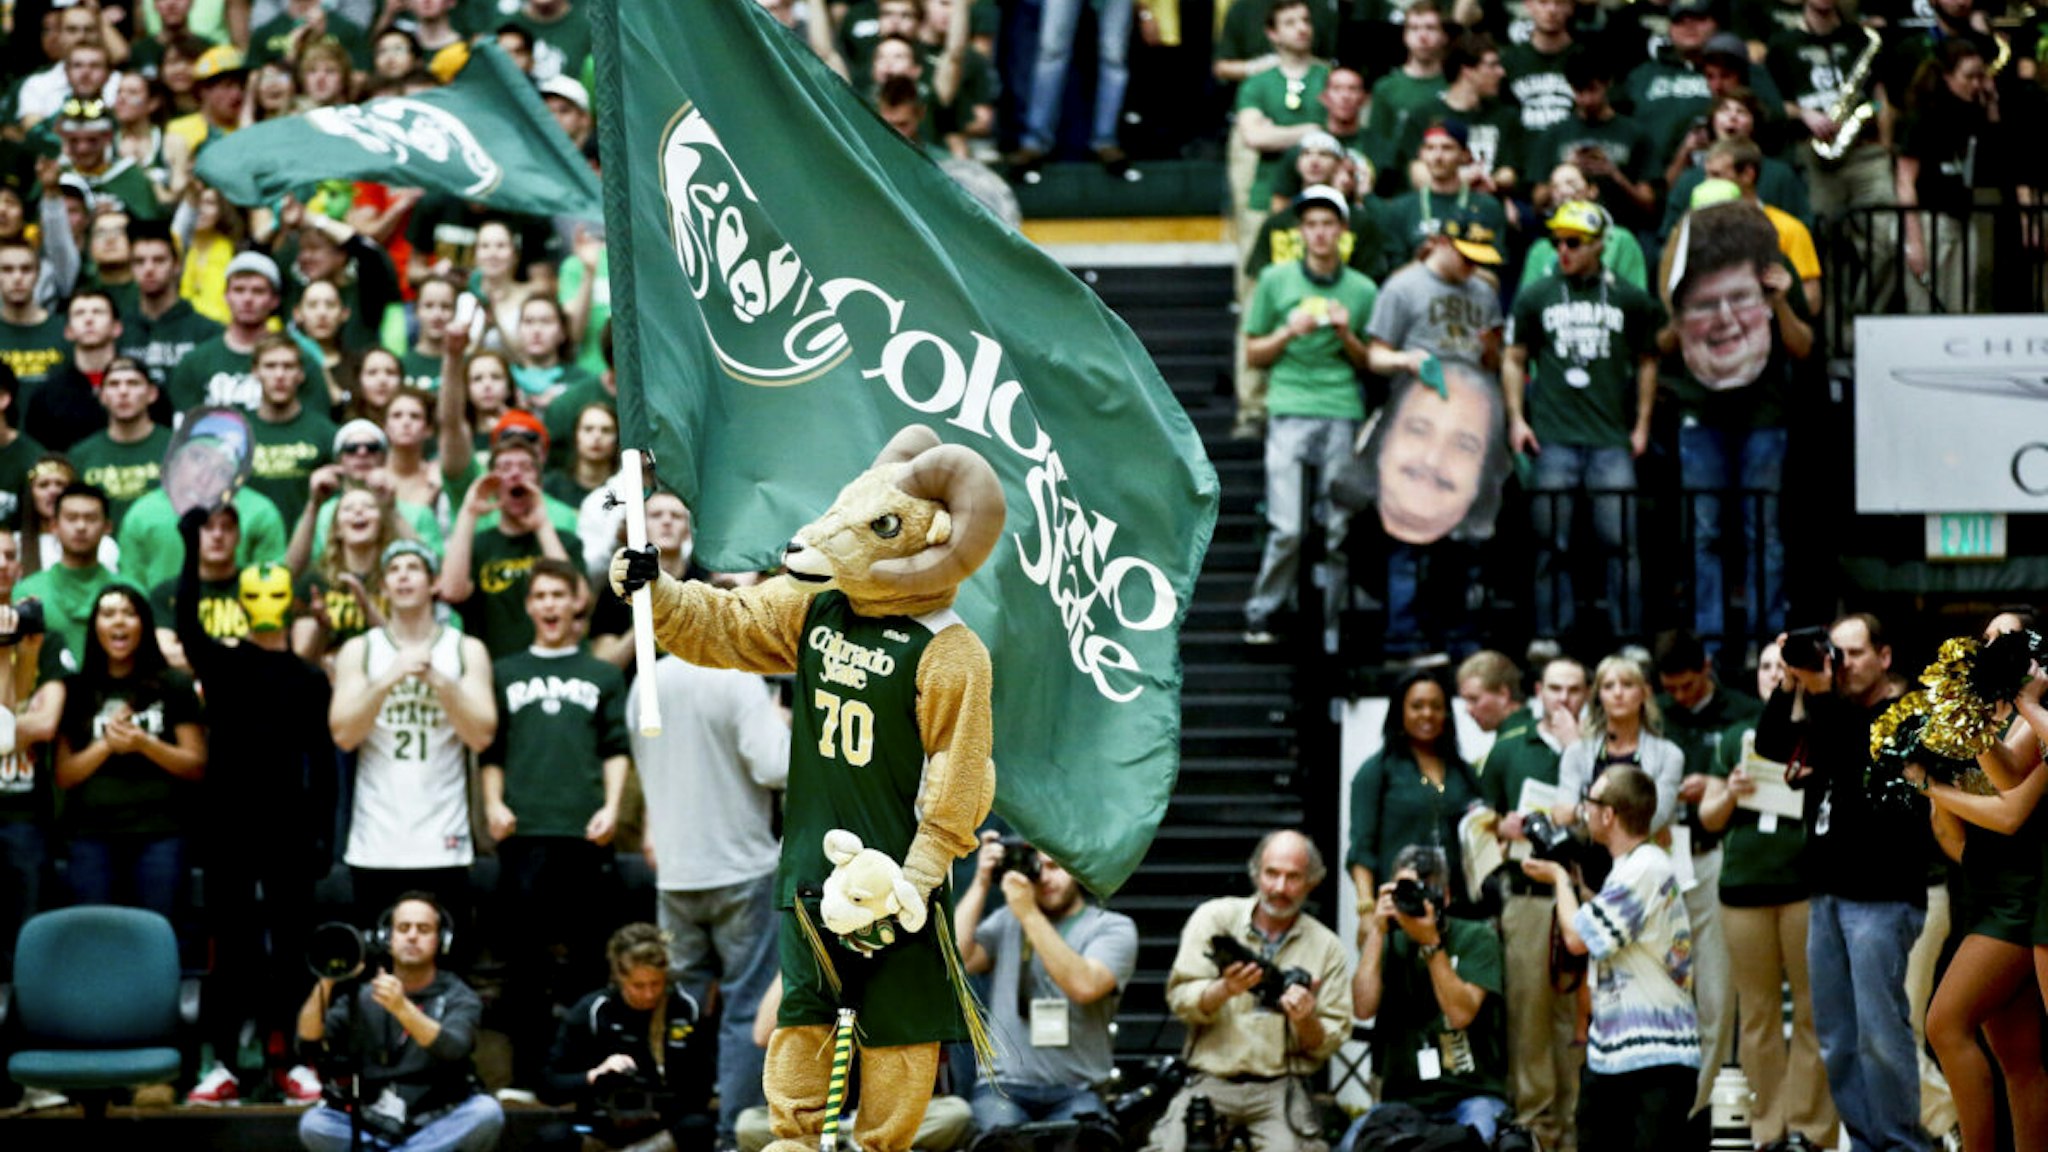 Colorado State University mascot Cam the Ram tries to energize the fans during their regular season Mountain West basketball game against New Mexico at Moby Arena in Fort Collins, Co. on Saturday February 23, 2013.